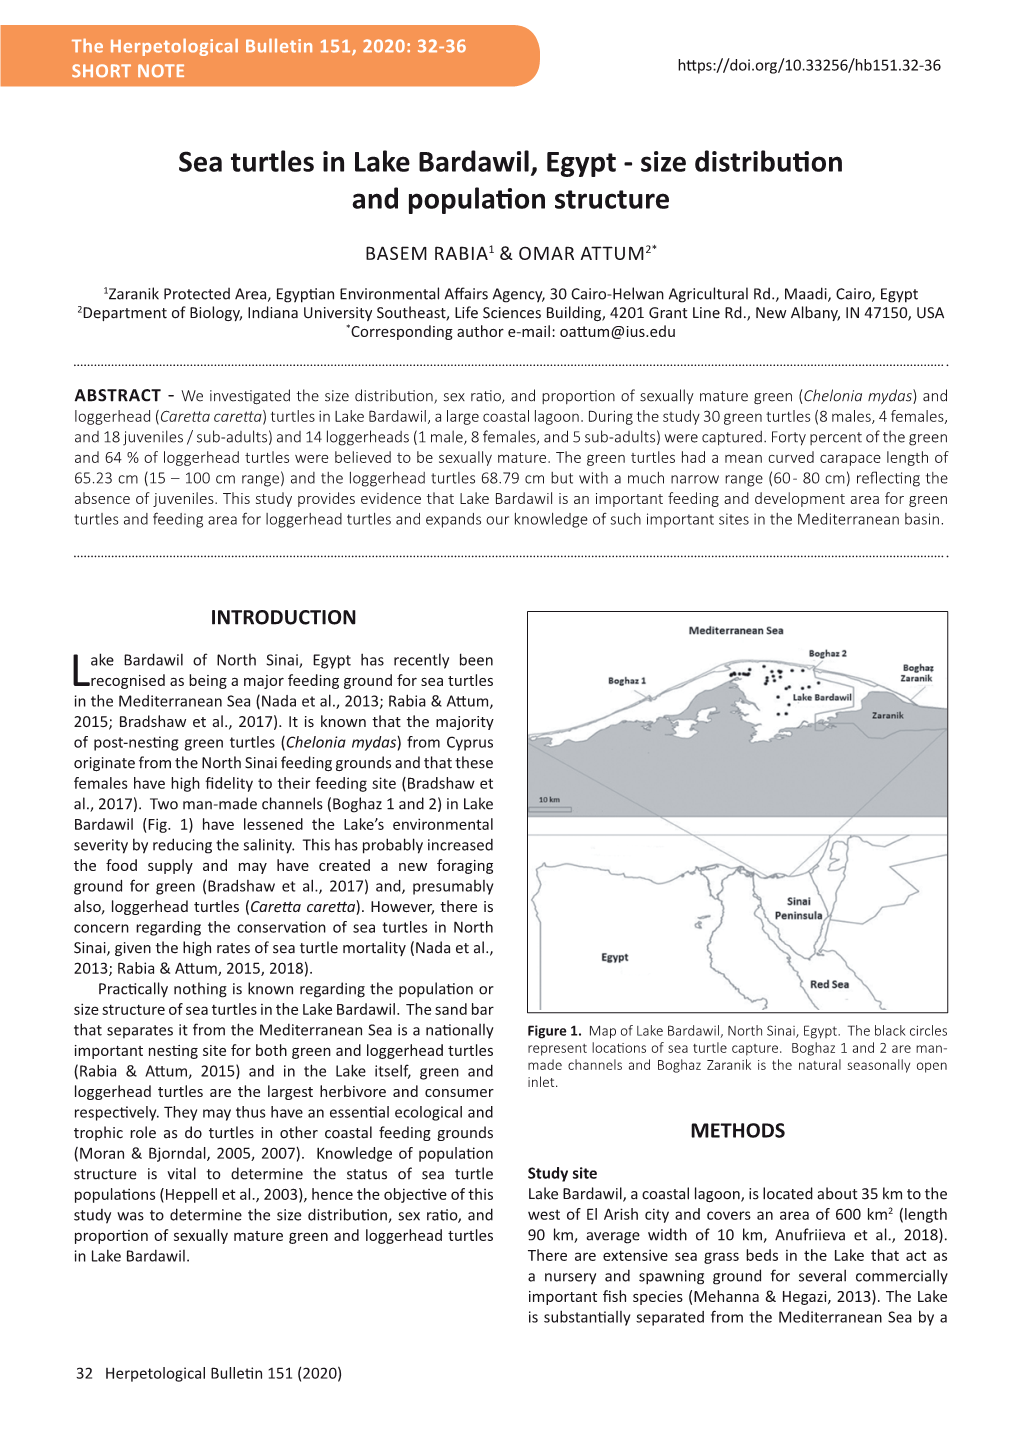 Sea Turtles in Lake Bardawil, Egypt - Size Distribution and Population Structure